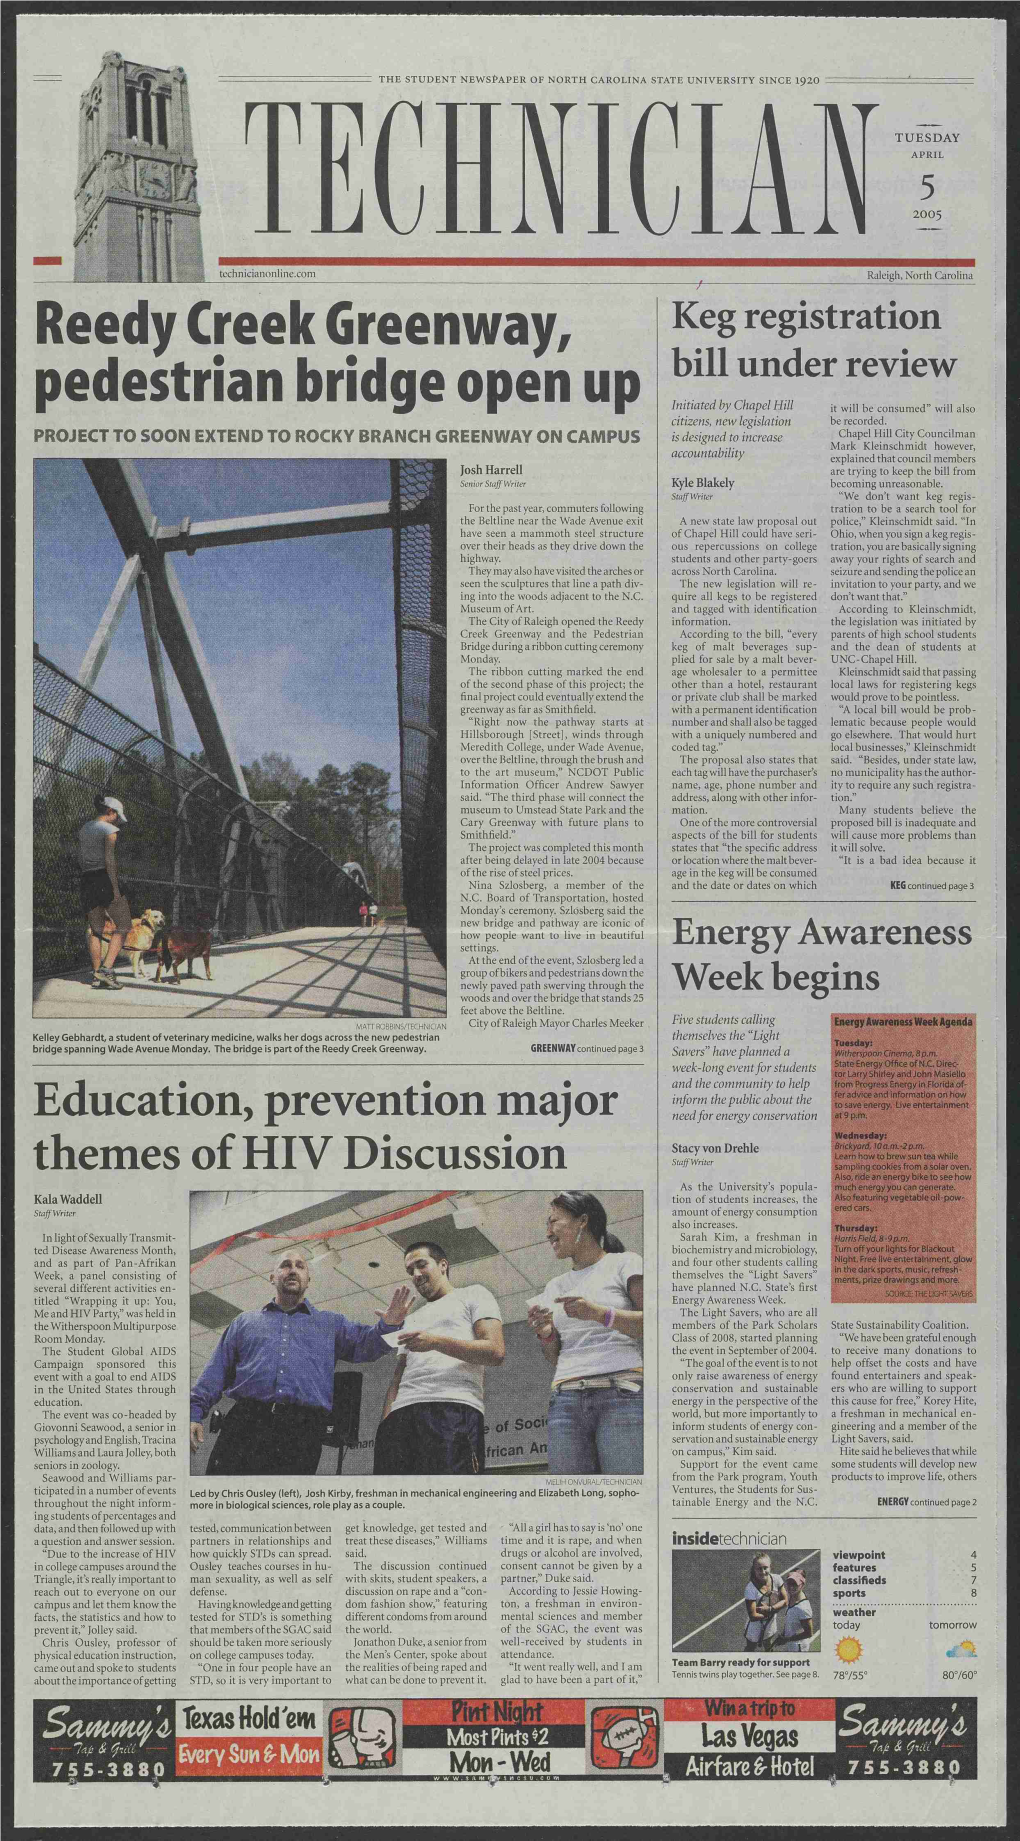 Reedy Creek the STUDENT NEWSPAPER of NORTH